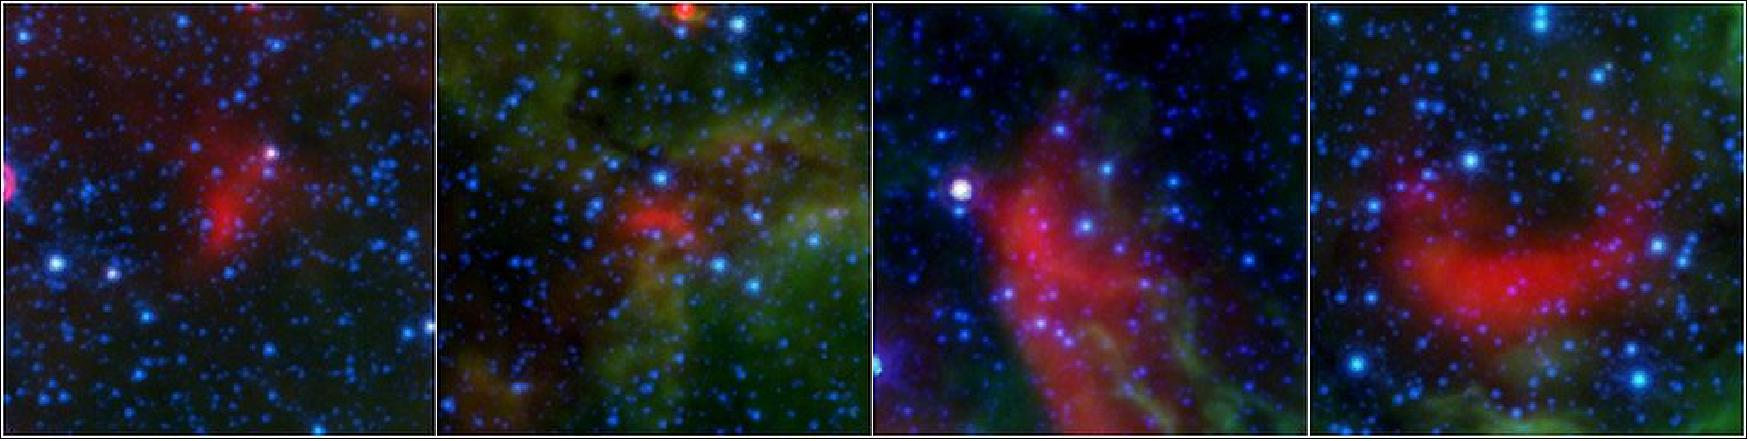 Figure 42: Bow shocks between the bubbles. These four images show bow shocks, or arcs of warm dust formed as winds from fast-moving stars push aside dust grains scattered sparsely through most of the nebula(image credit: NASA/JPL-Caltech/Milky Way Project)